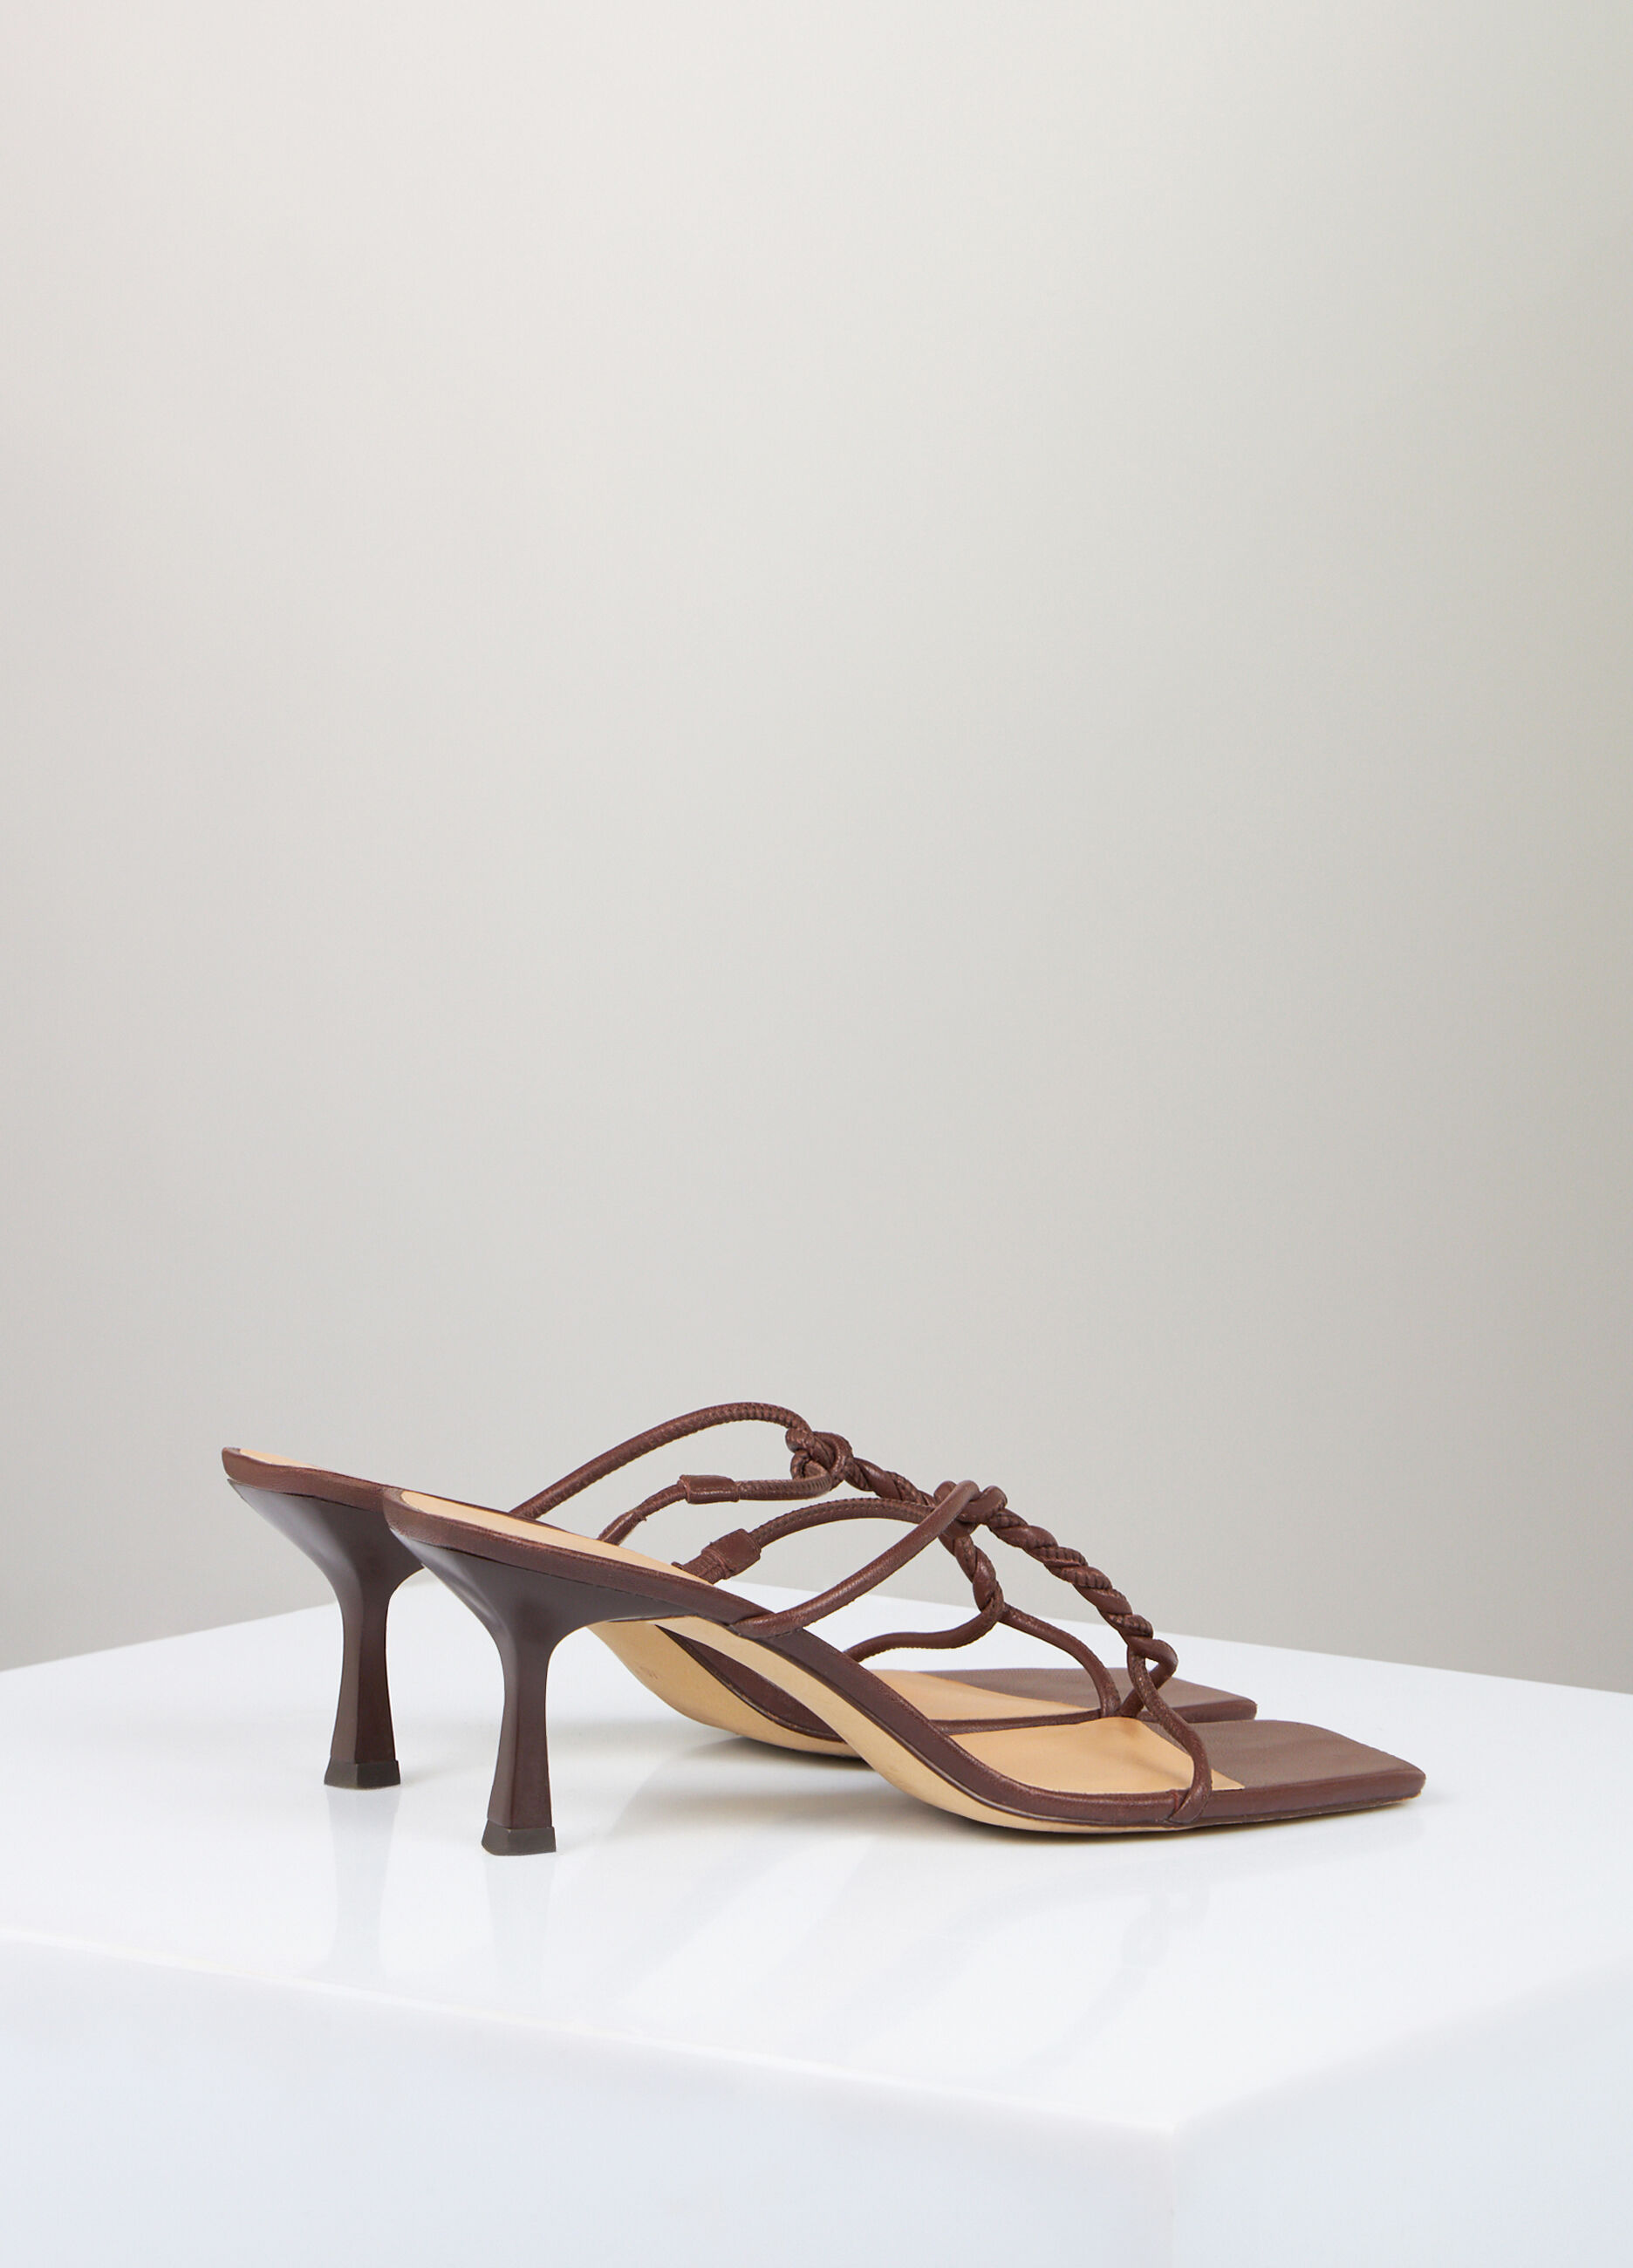 Woven sandals in real leather